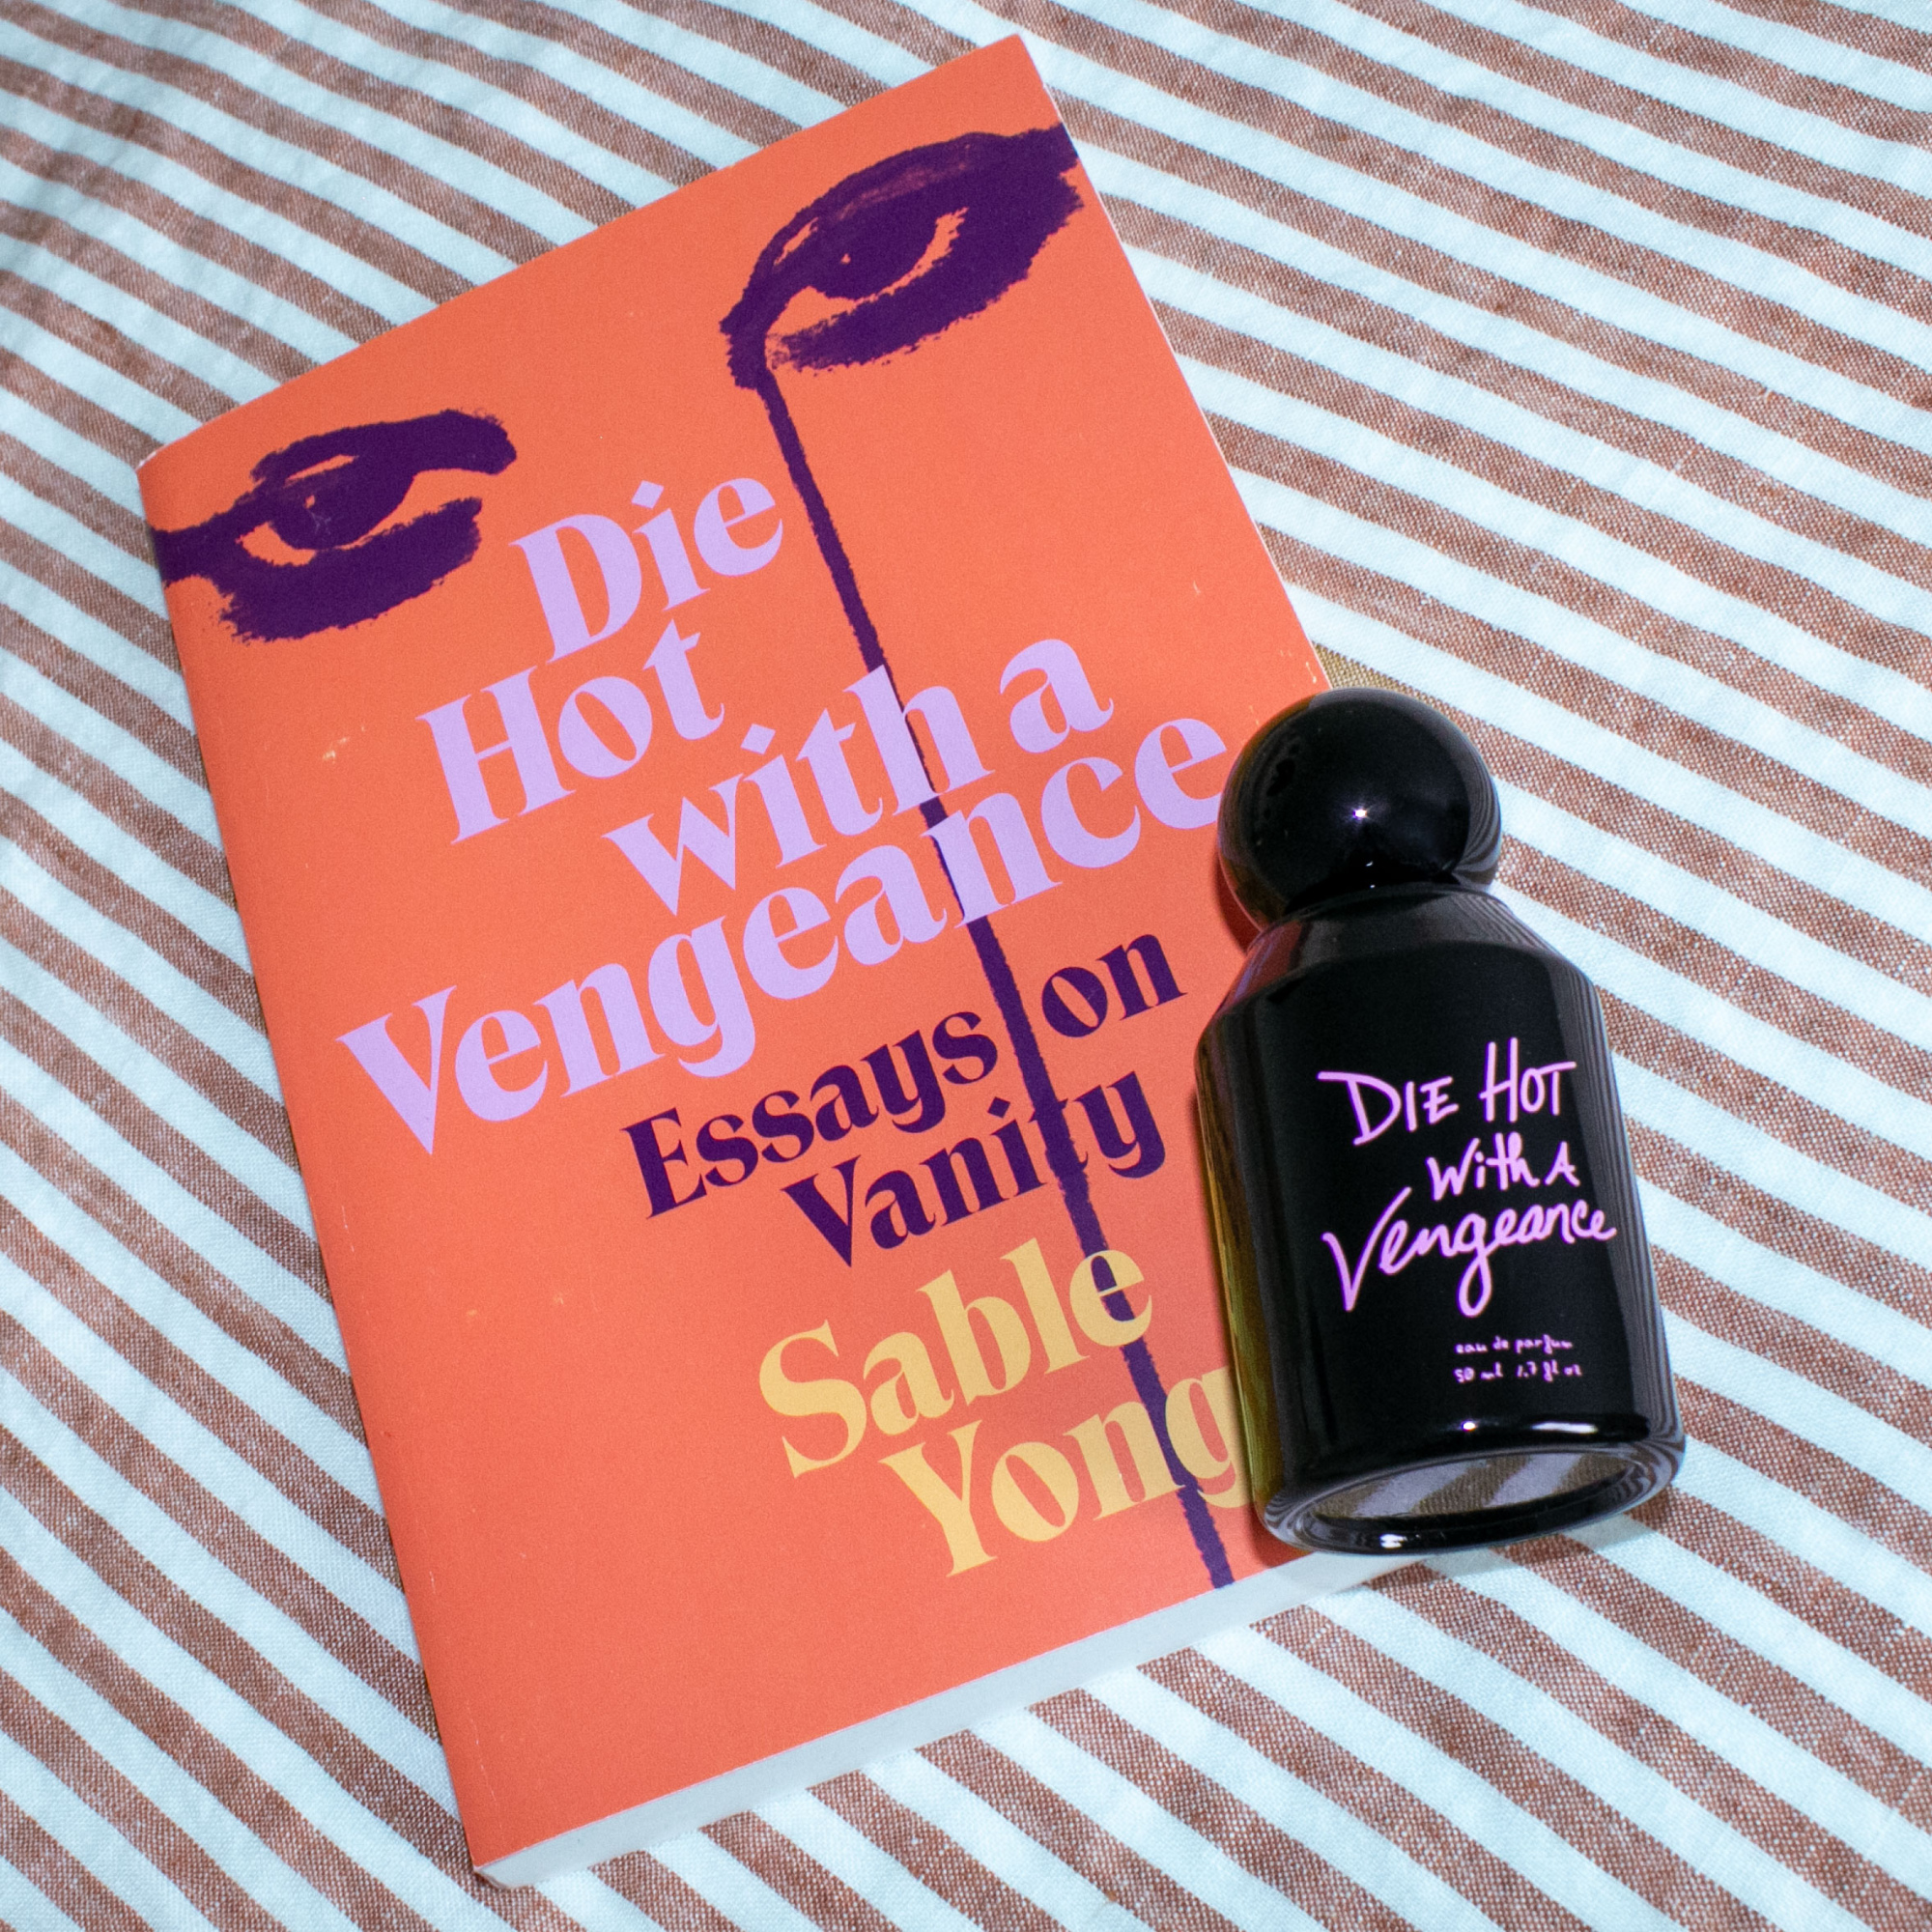 Die Hot With a Vengeance Book and Perfume by Sable Yong